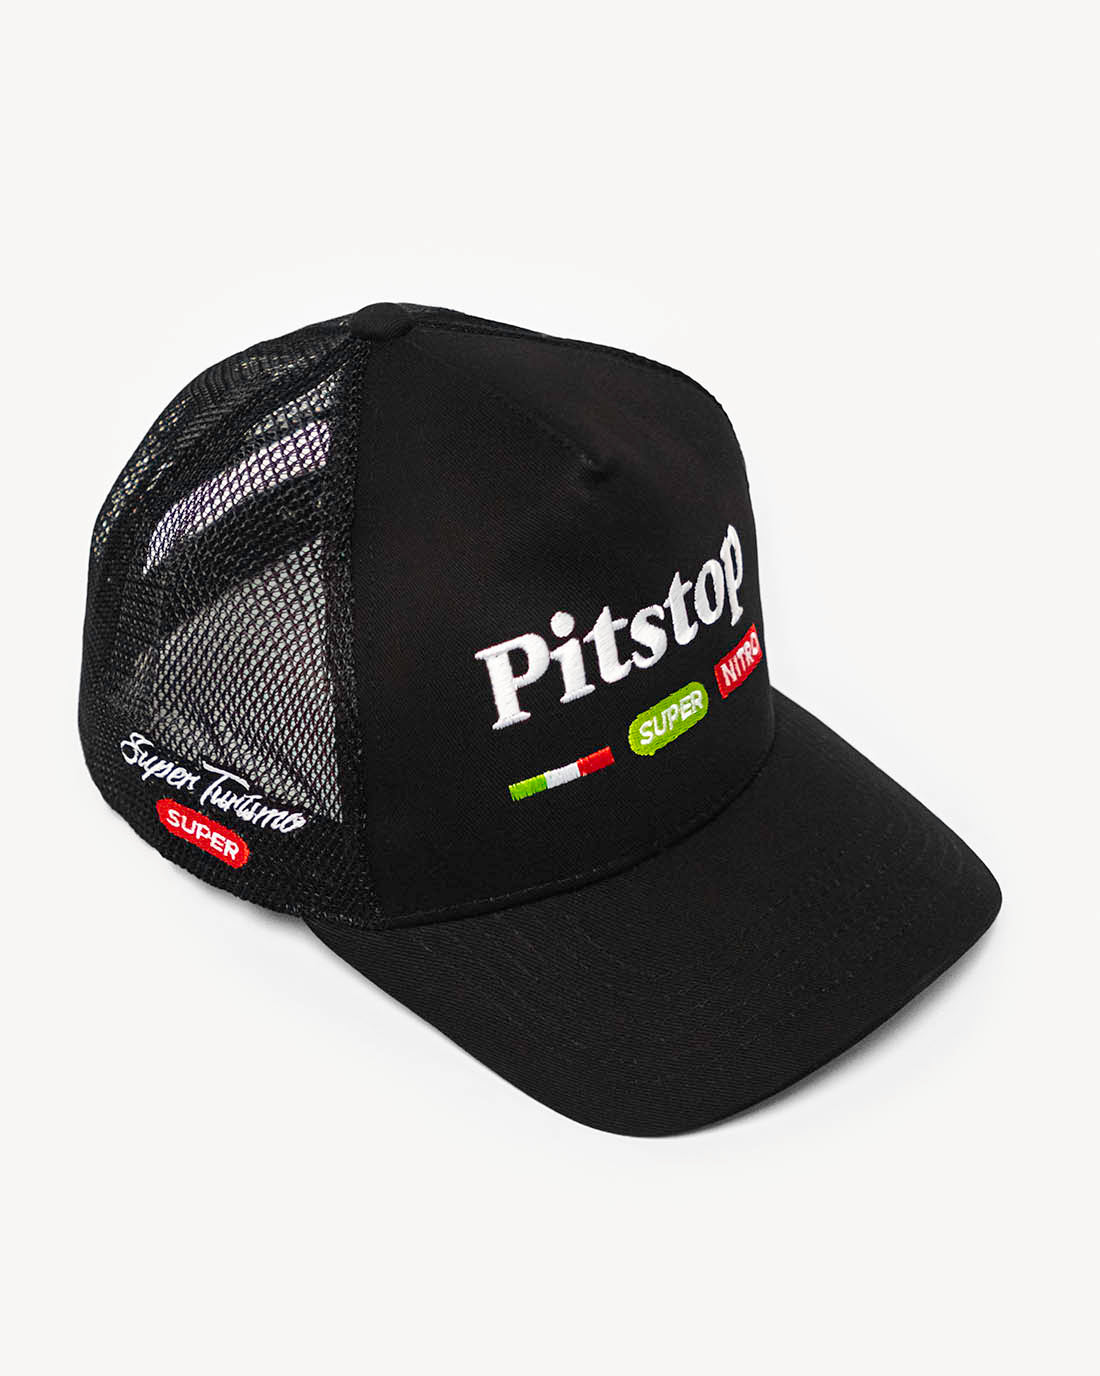 Front side view of a classic black snapback hat with stylish Italian-inspired embroidered design and cooling mesh back.